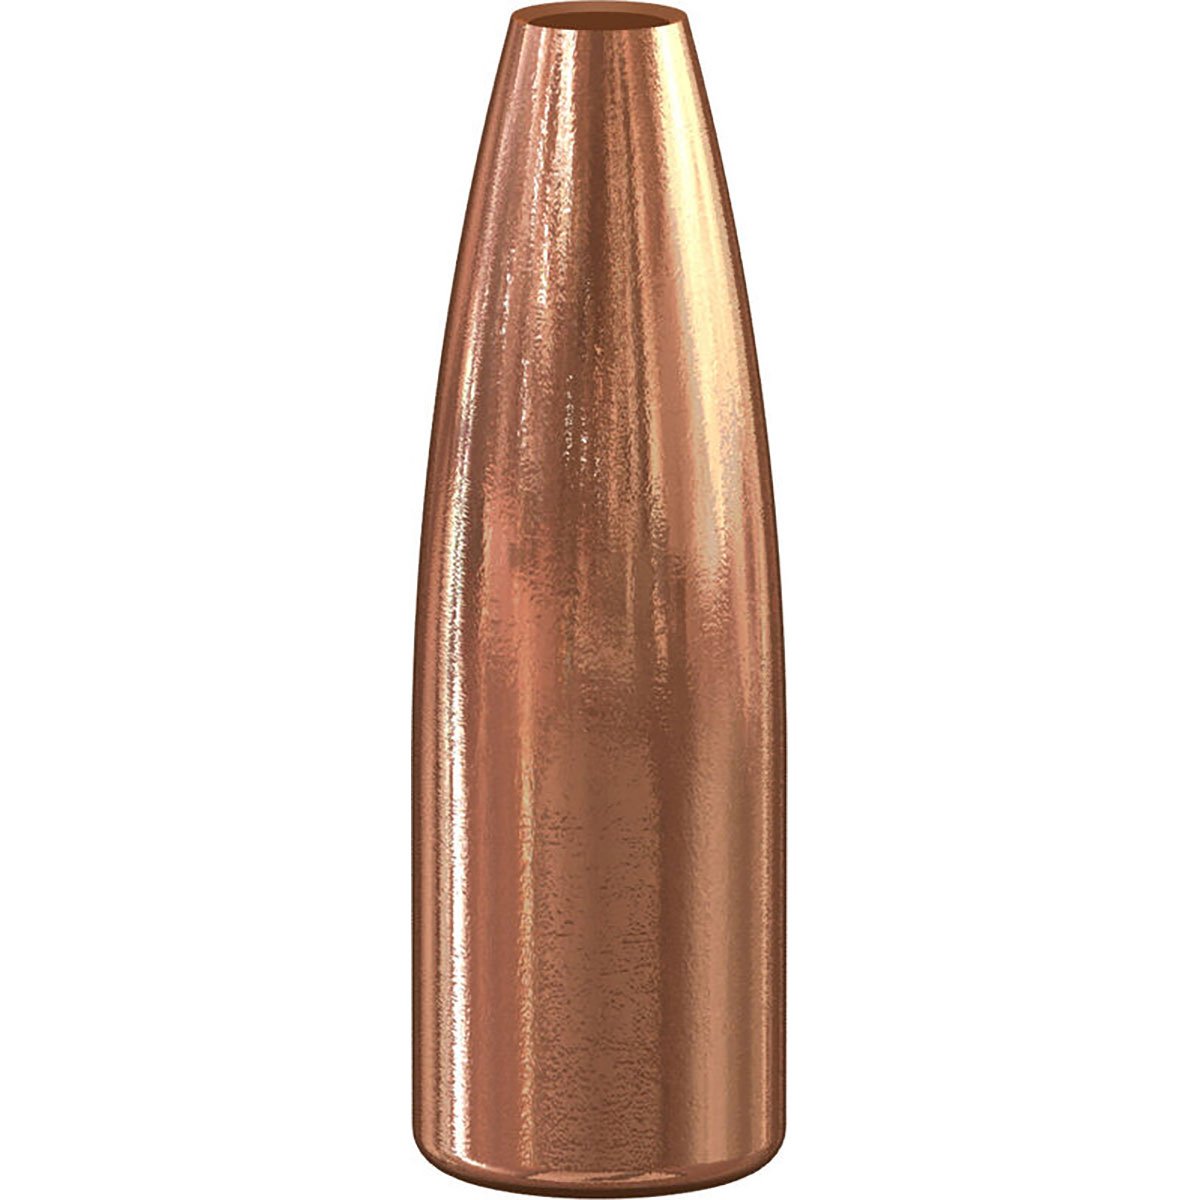 SPEER - VARMINT 270 CALIBER (0.277") JACKETED HOLLOW POINT BULLETS